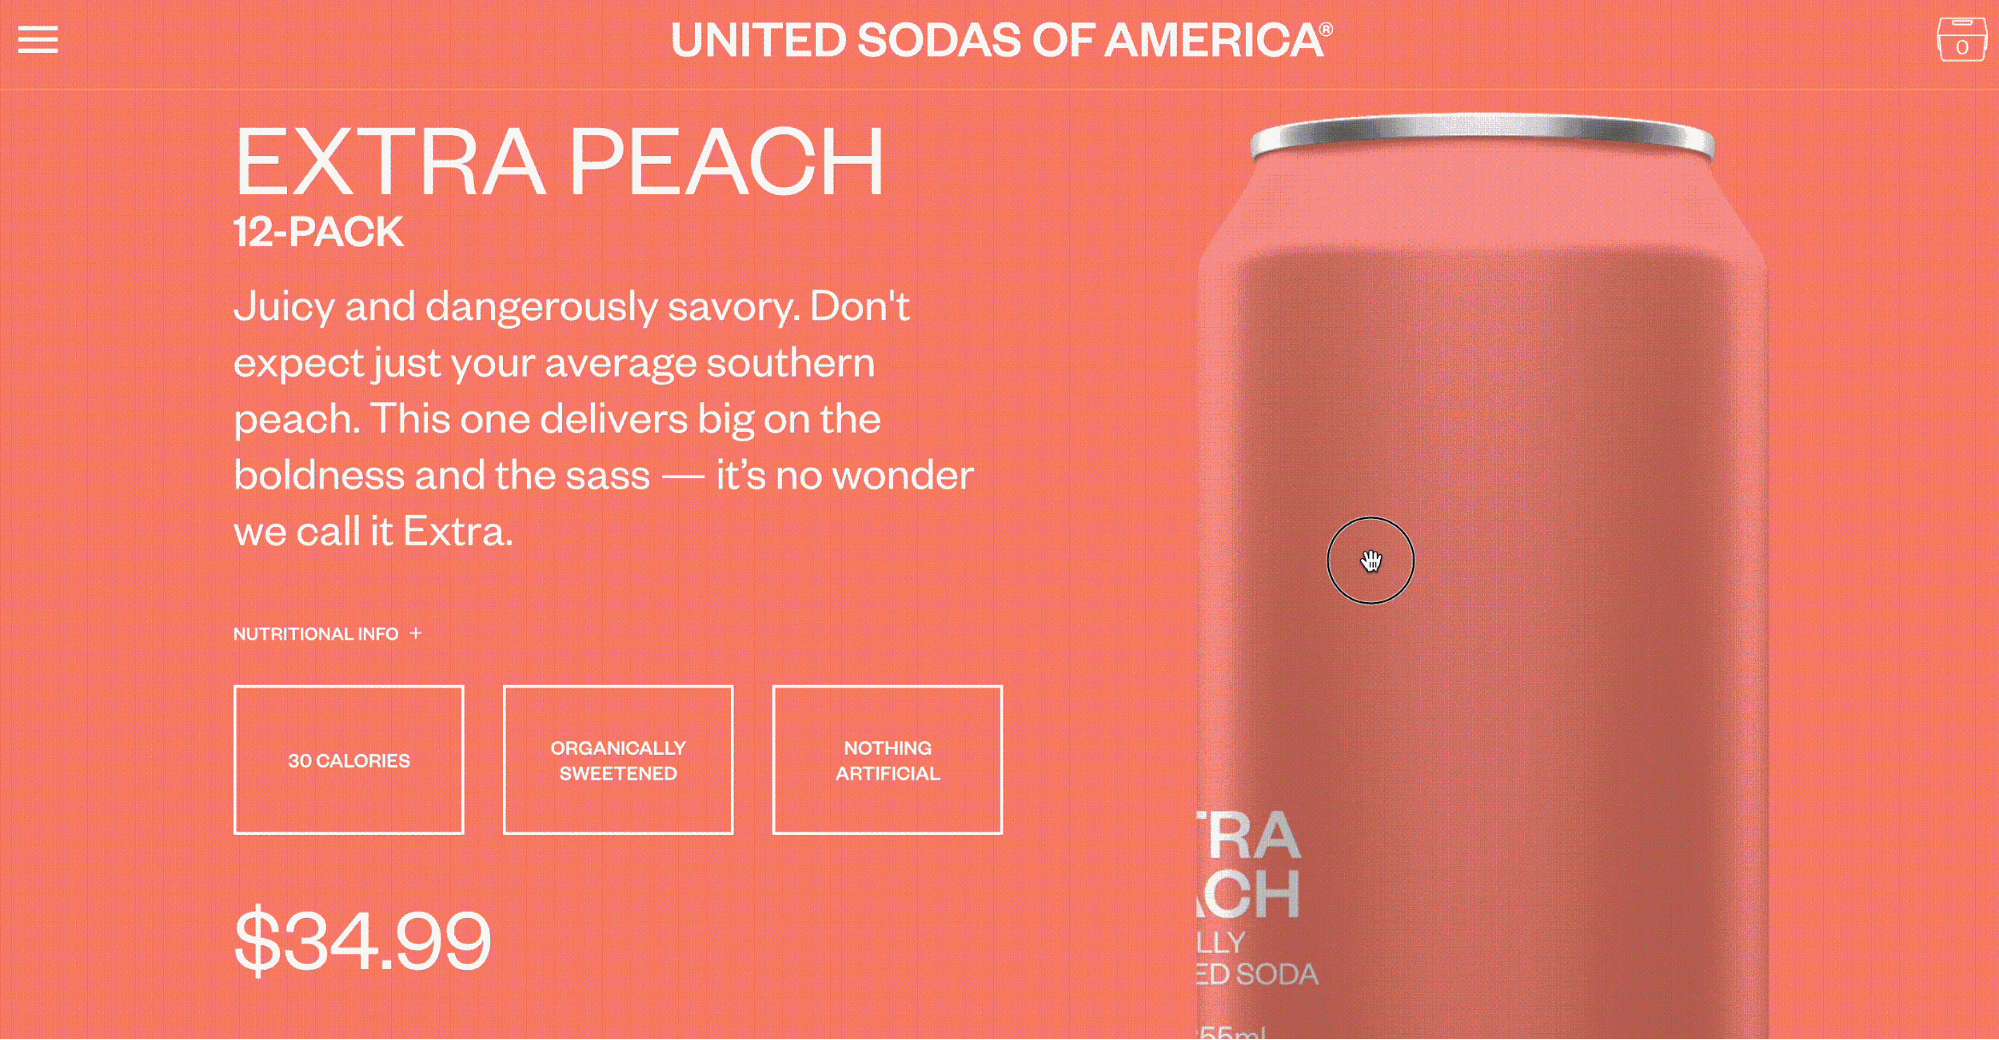 United Sodas of America product page direct-to-consumer brands